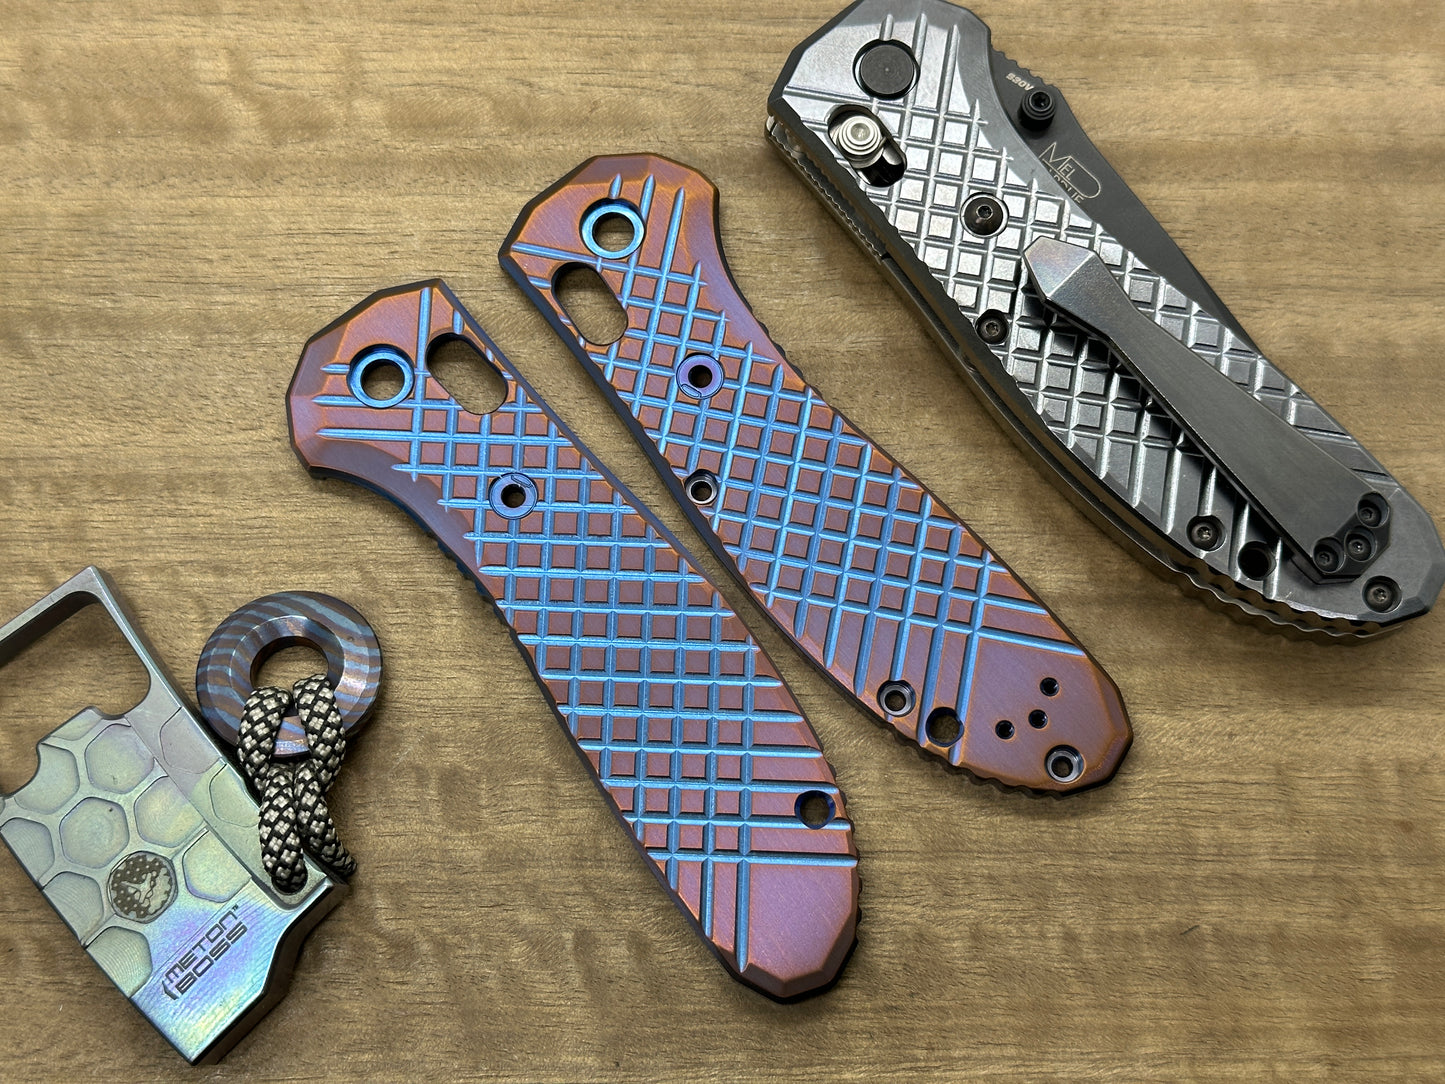 FRAG milled Flamed 2-Tone Titanium Scales for Benchmade GRIPTILIAN 551 & 550